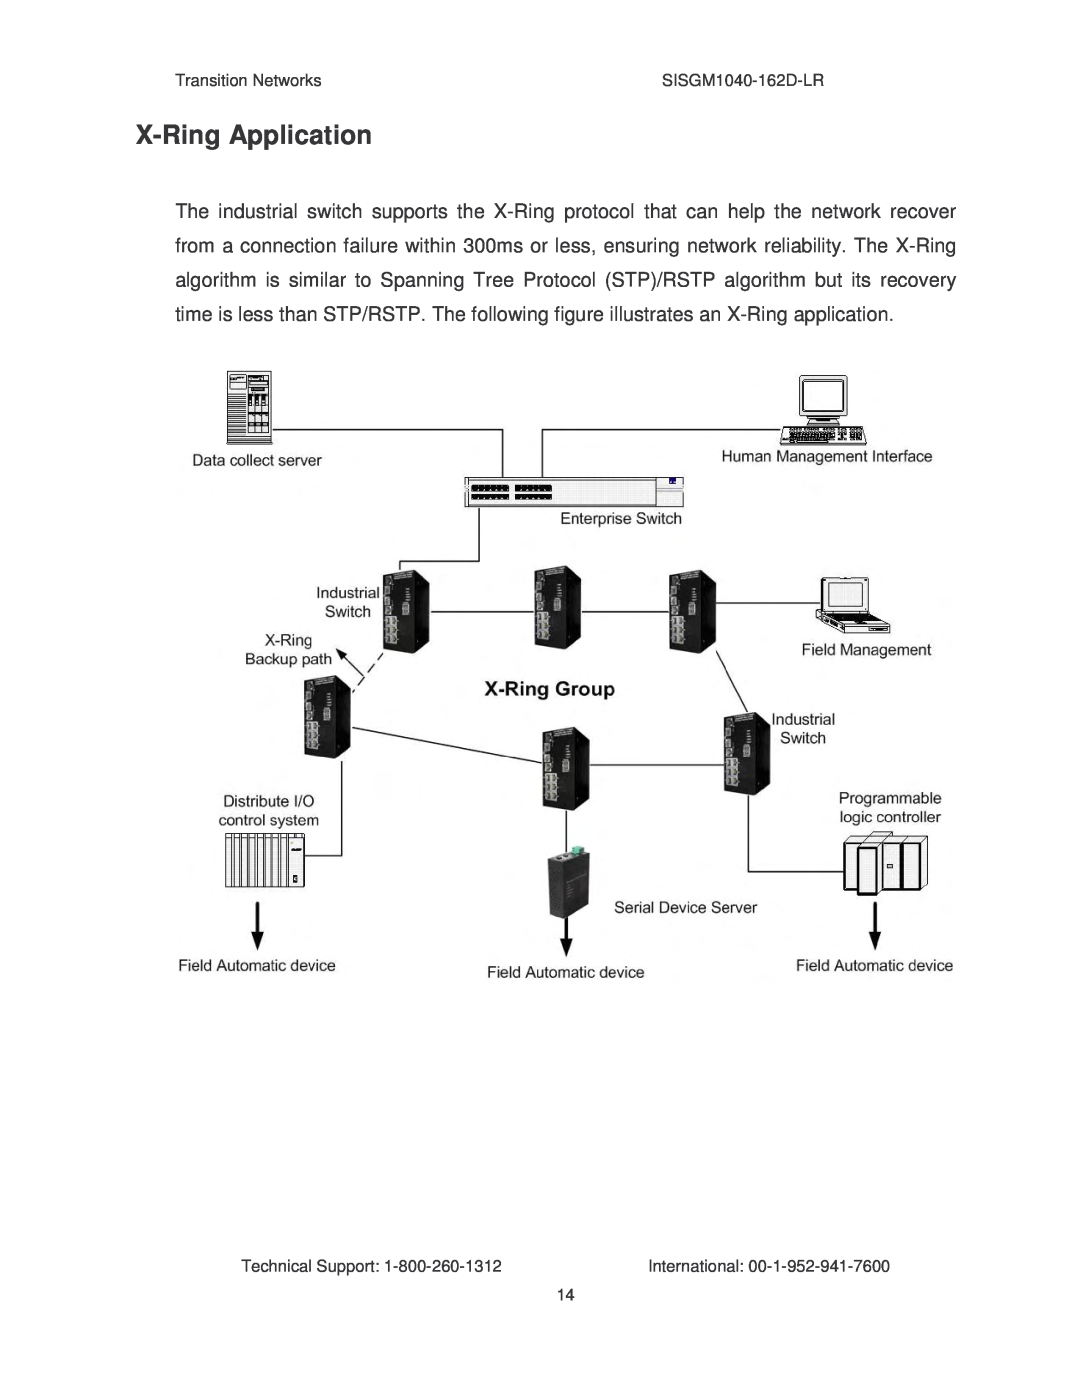 Transition Networks SISGM1040-162D manual X-Ring Application 